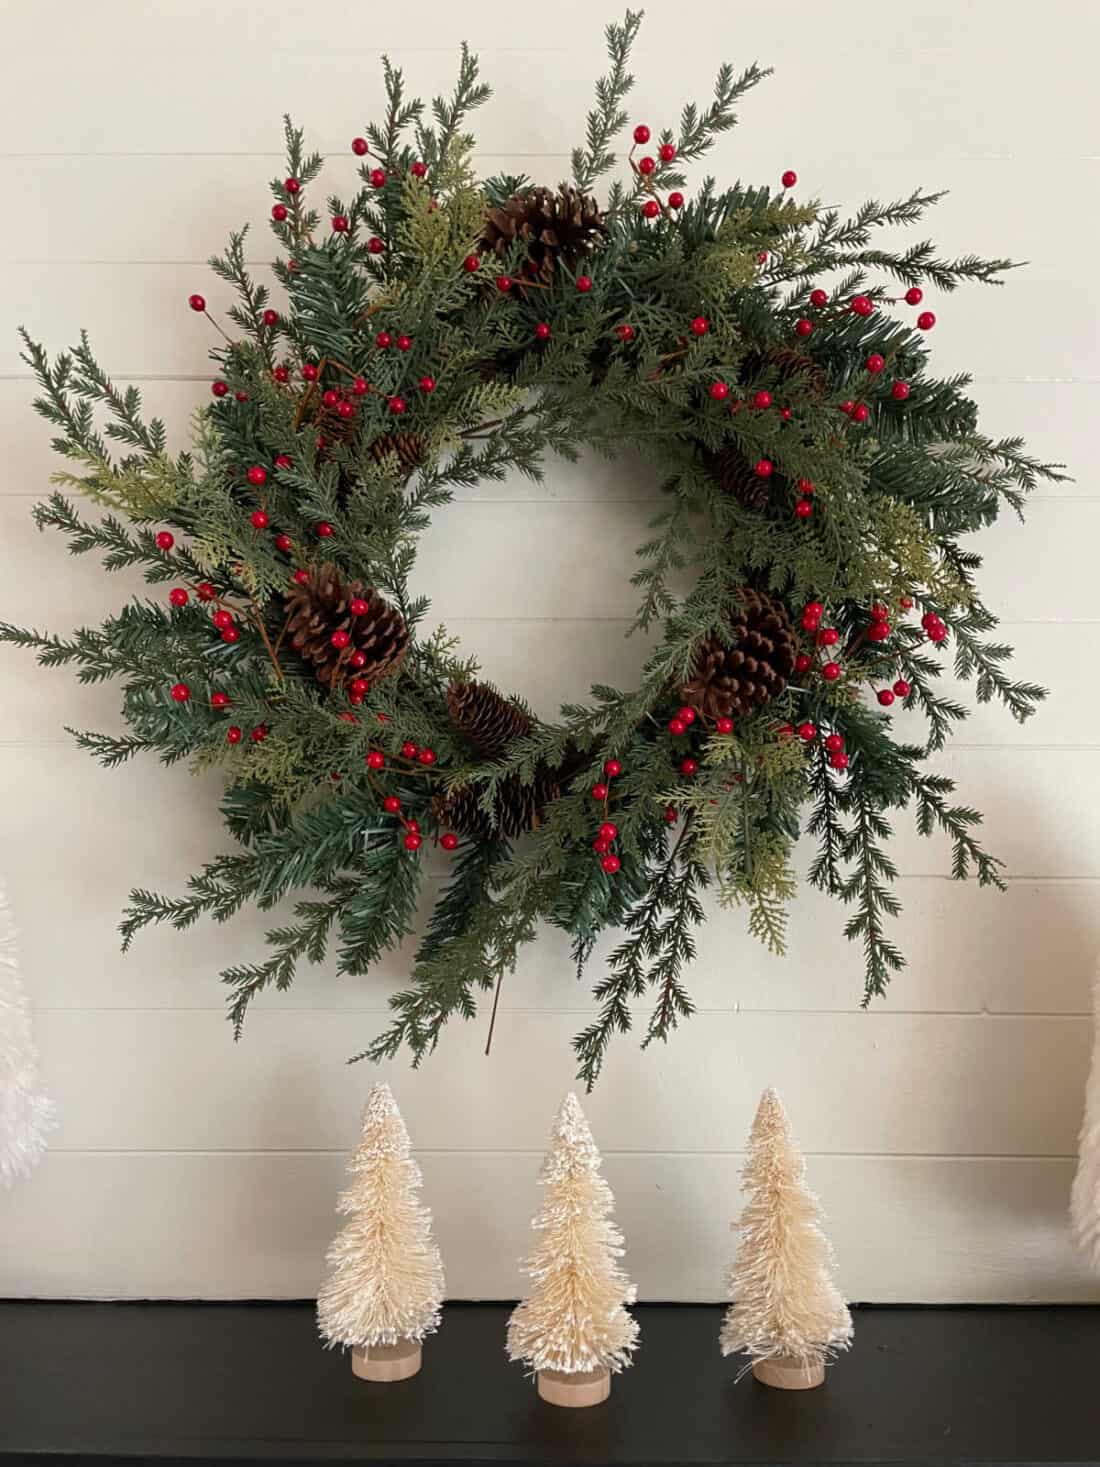 Artificial wreath with pinecones and red berries added hanging on mantle